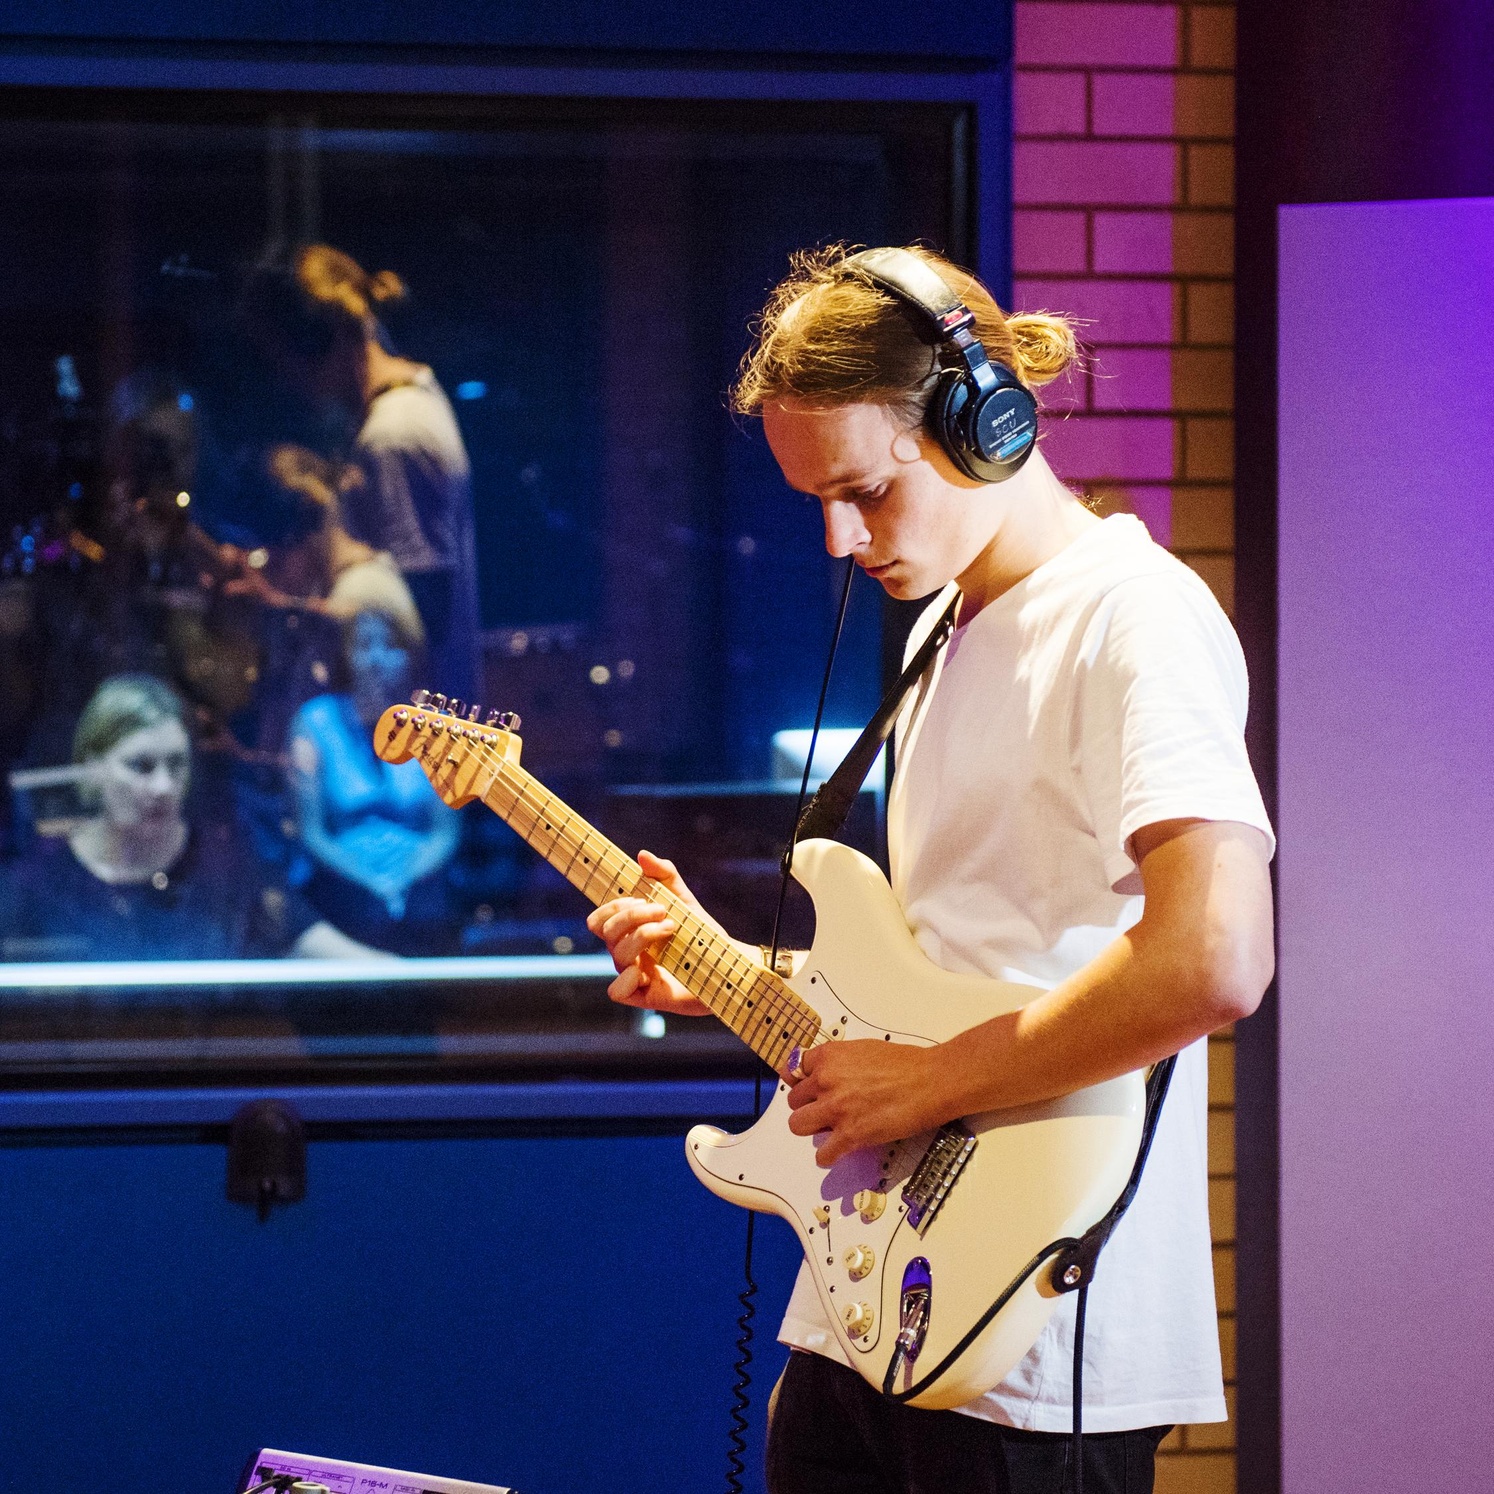 student playing guitar in recording Studio